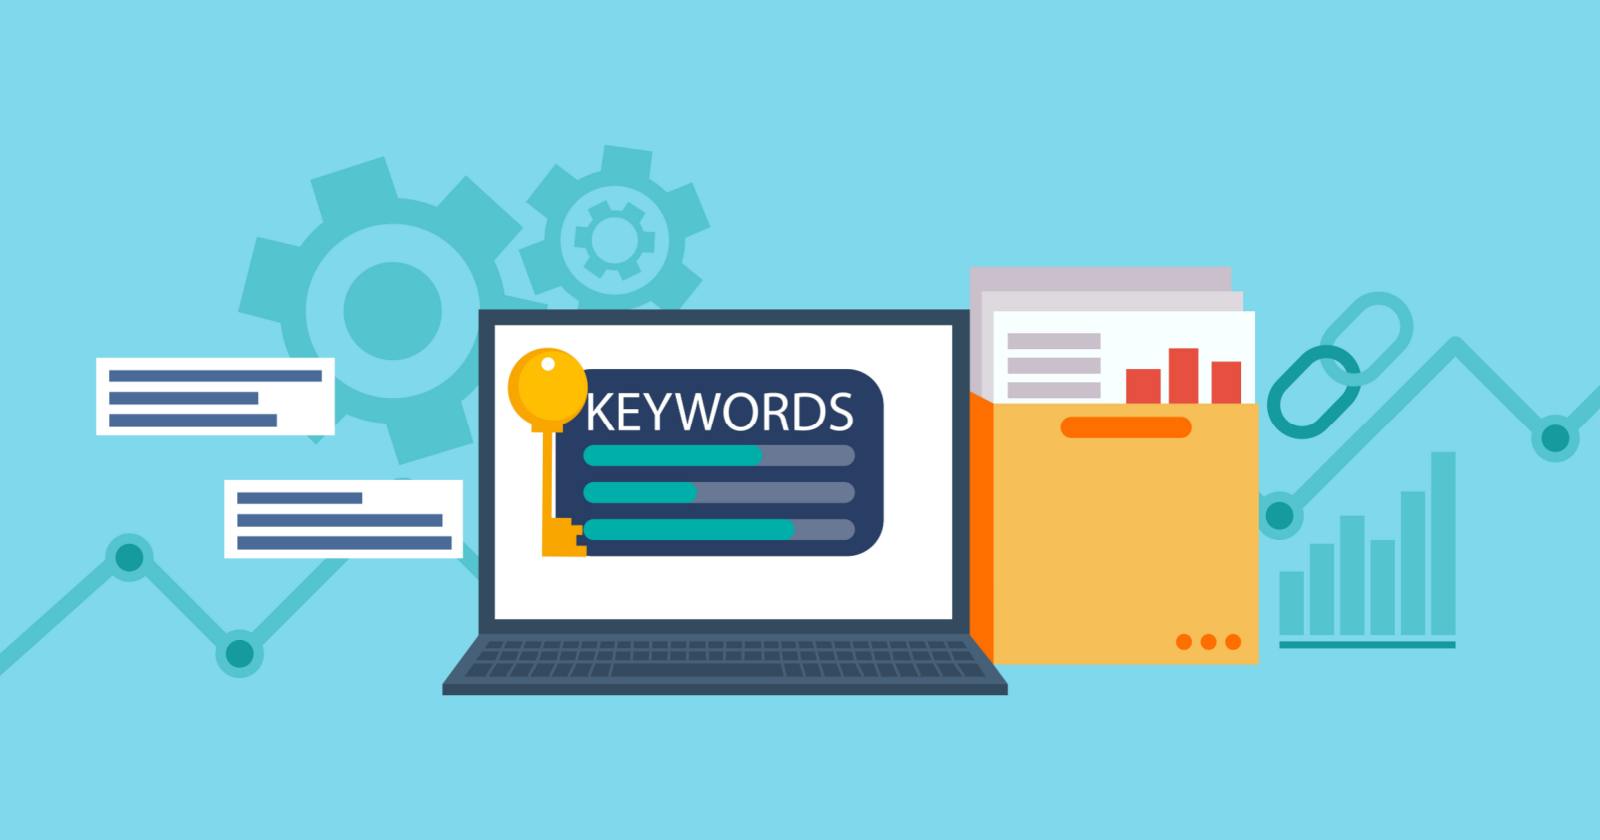 The Google Ads keyword matching process is presented in a new guide